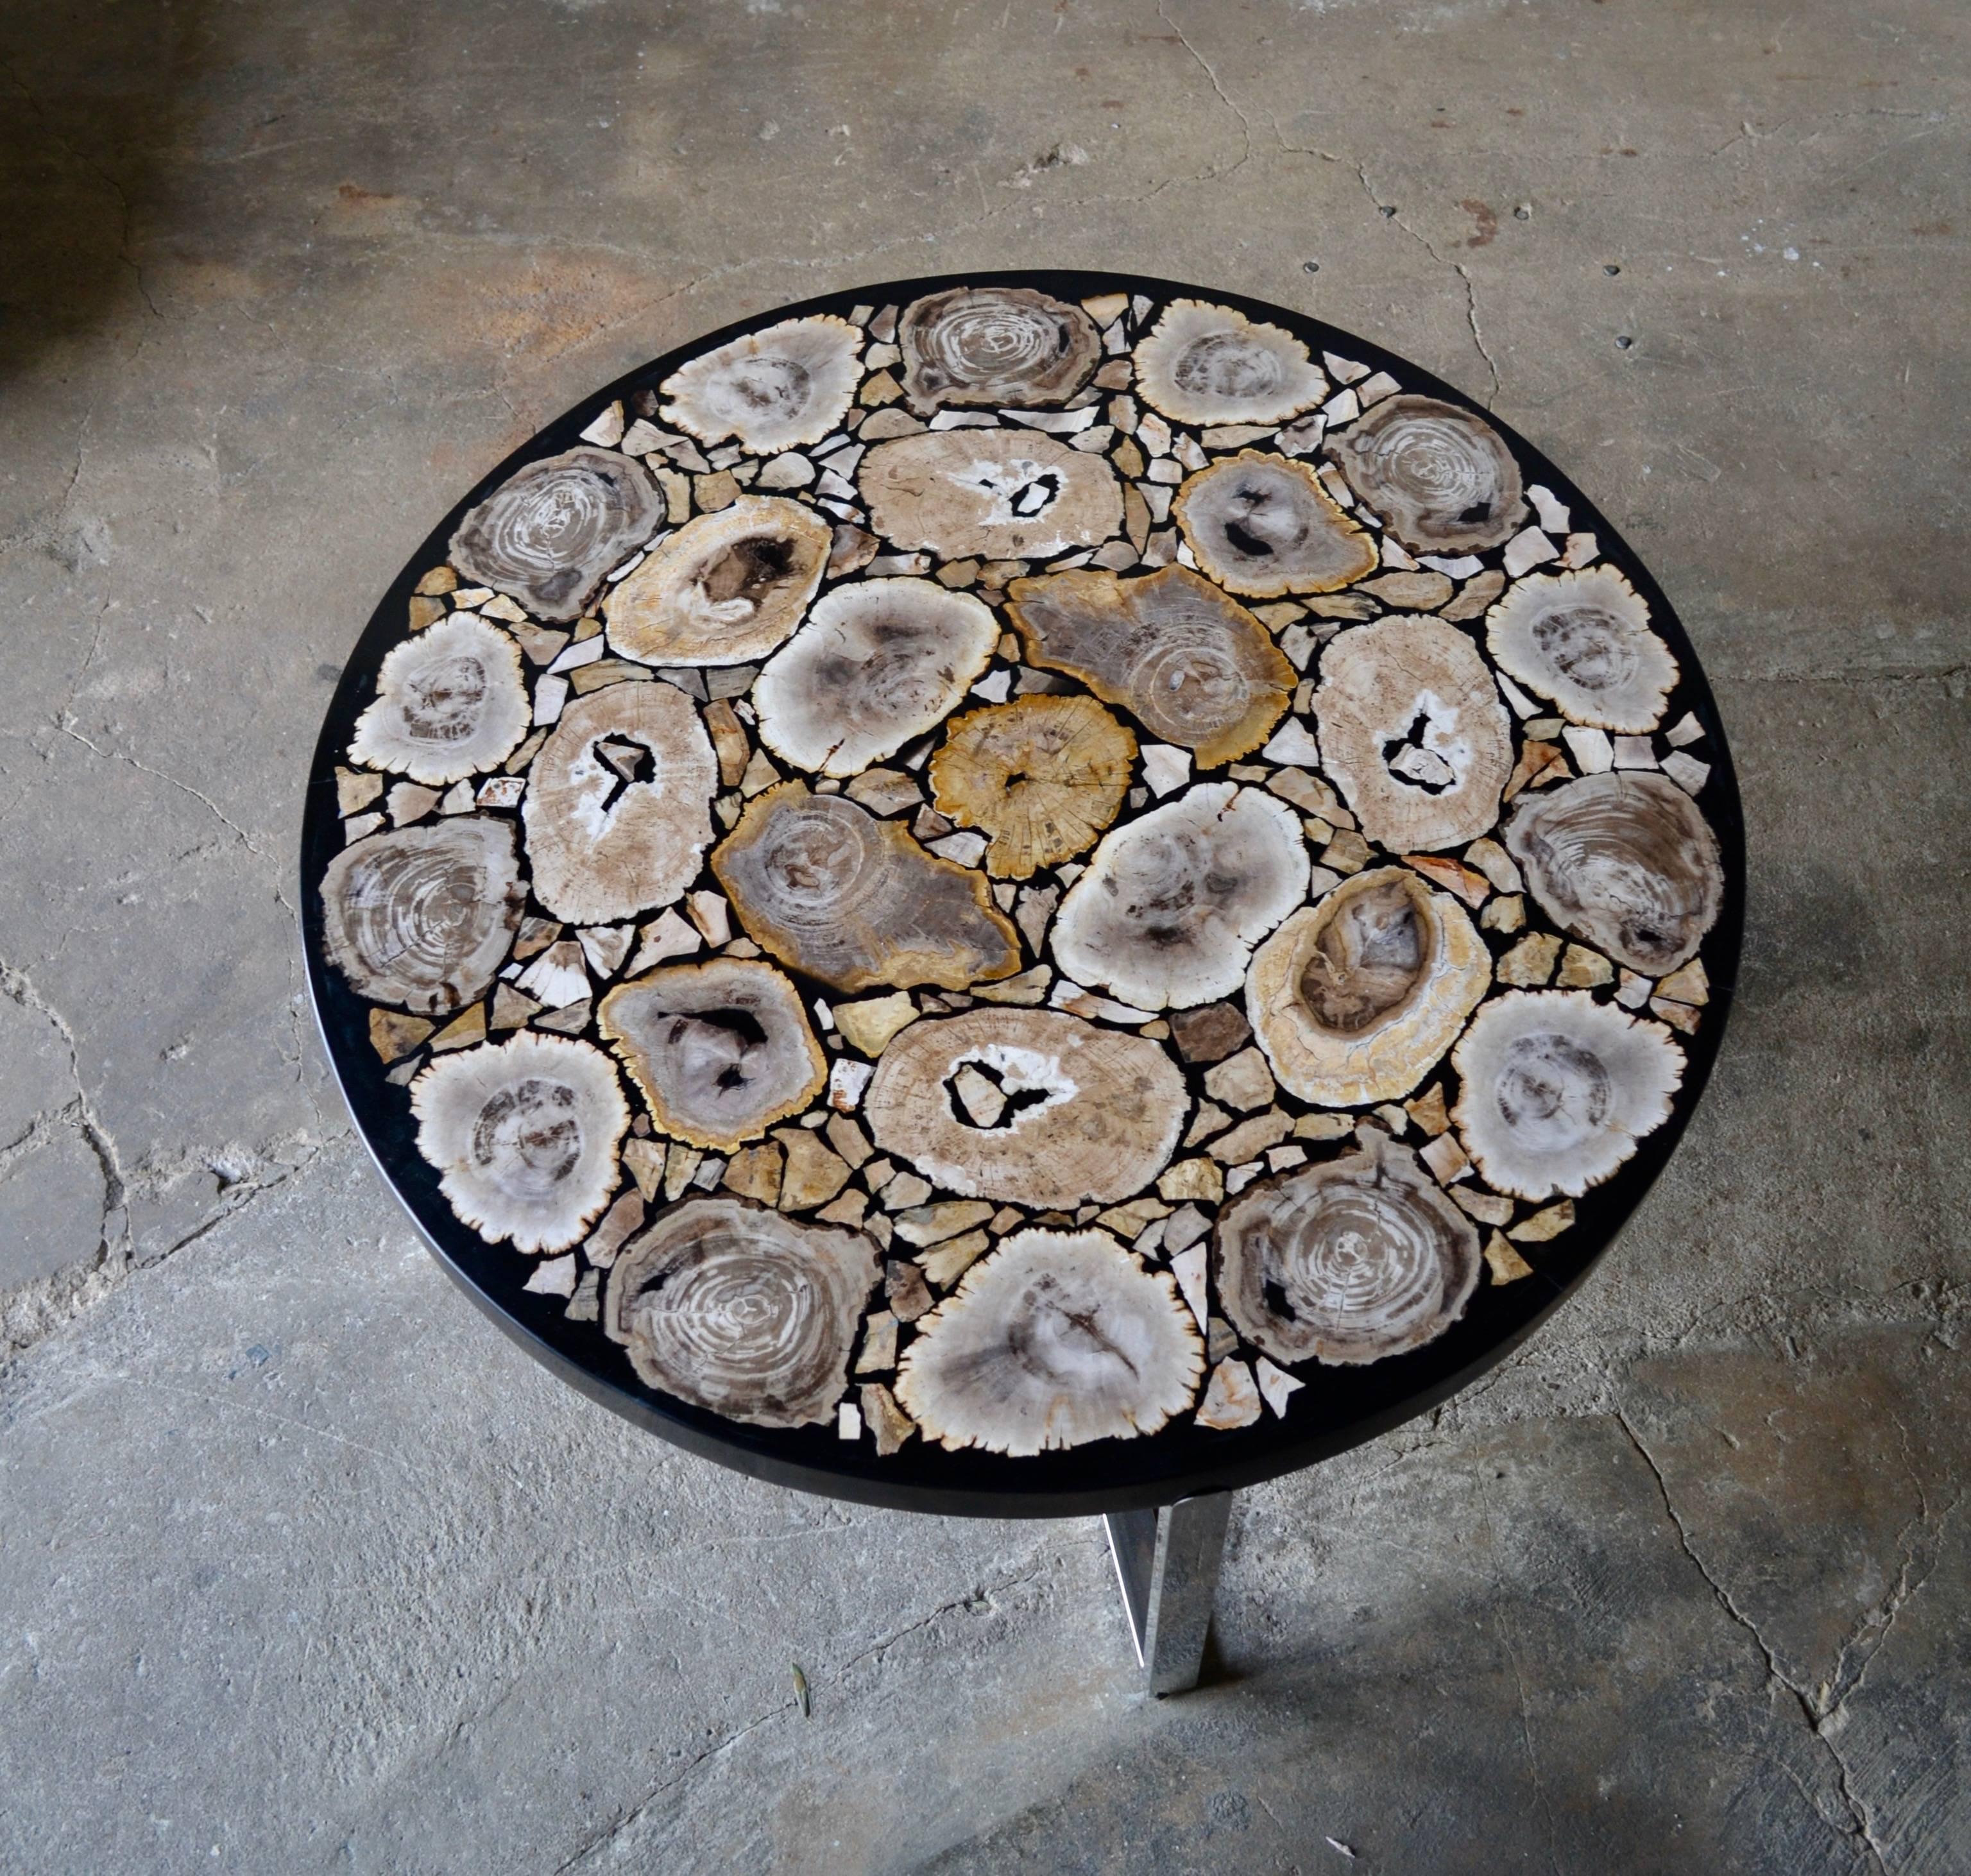 Petrified wood round coffee table black gloss and stainless steel base

Petrified wood (from the Greek root petro meaning 